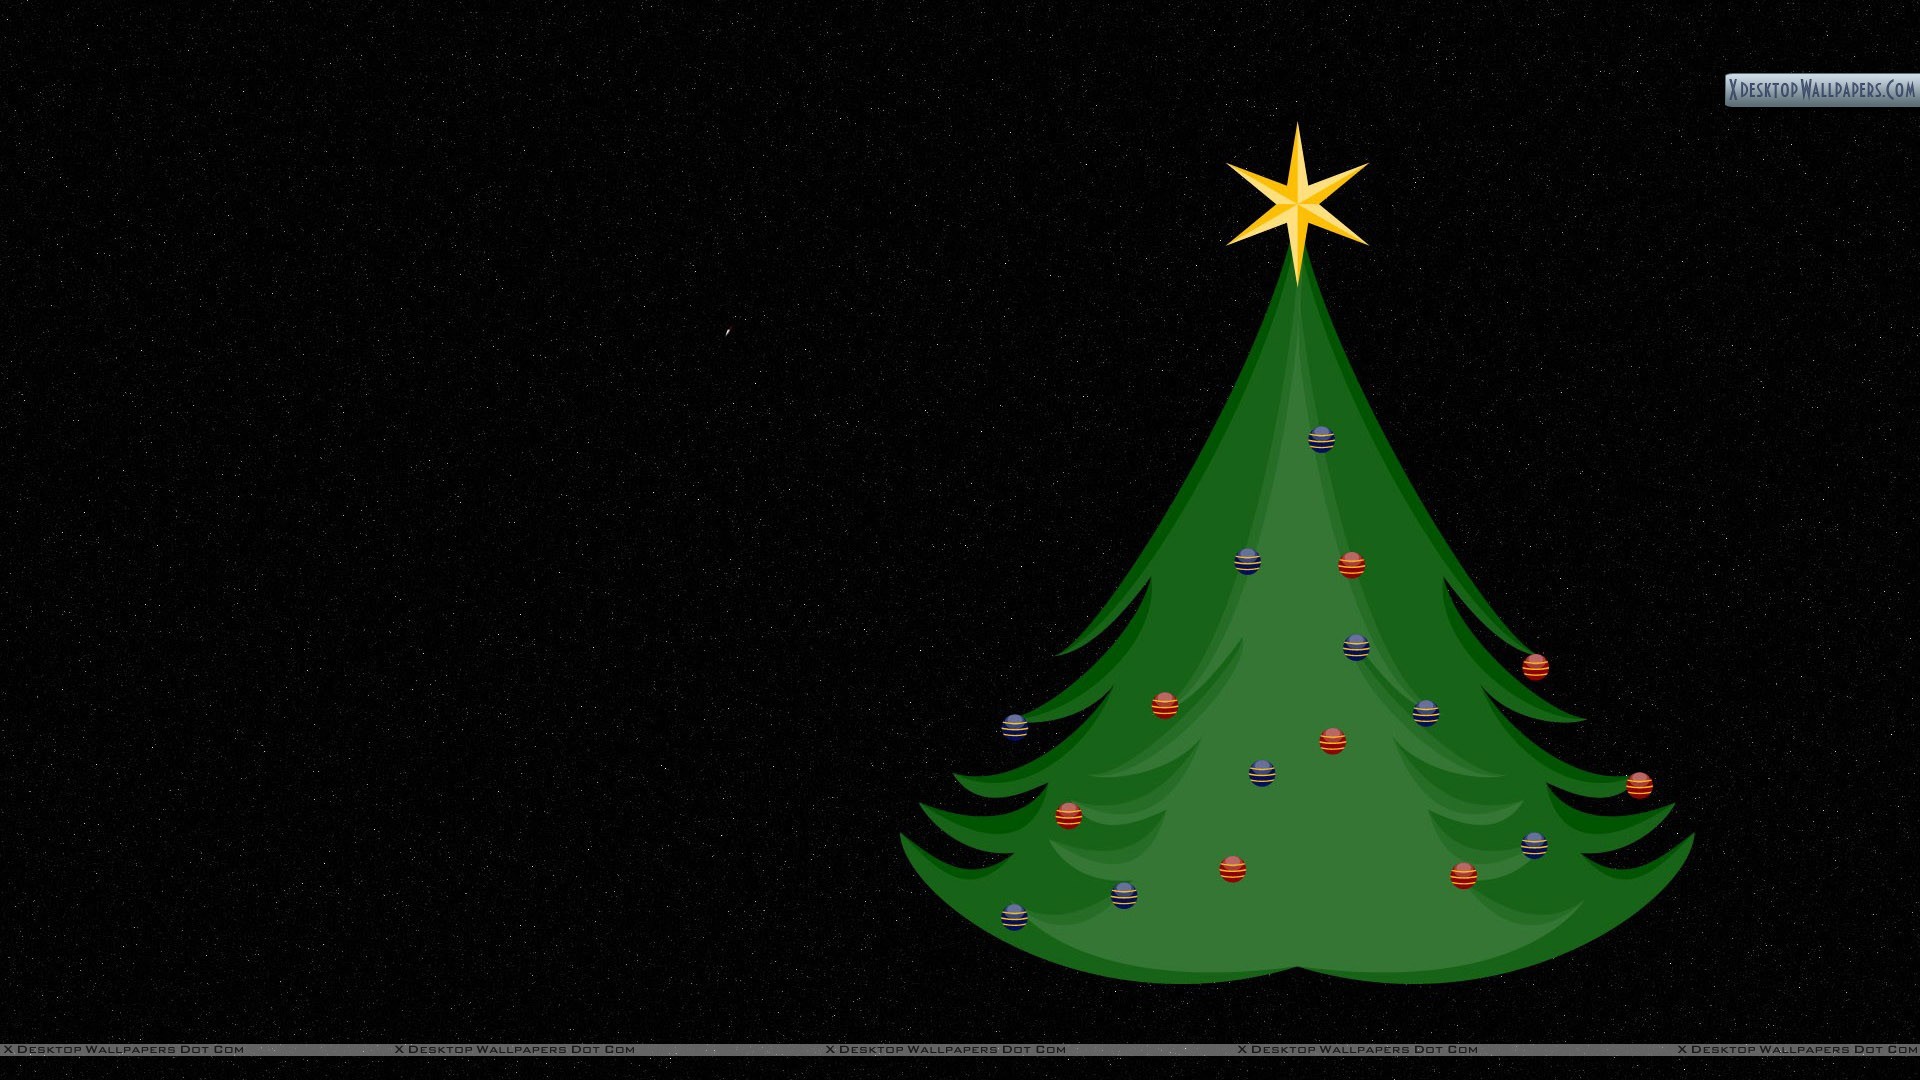 1920x1080 You are viewing wallpaper titled "Christmas Tree With Black ...